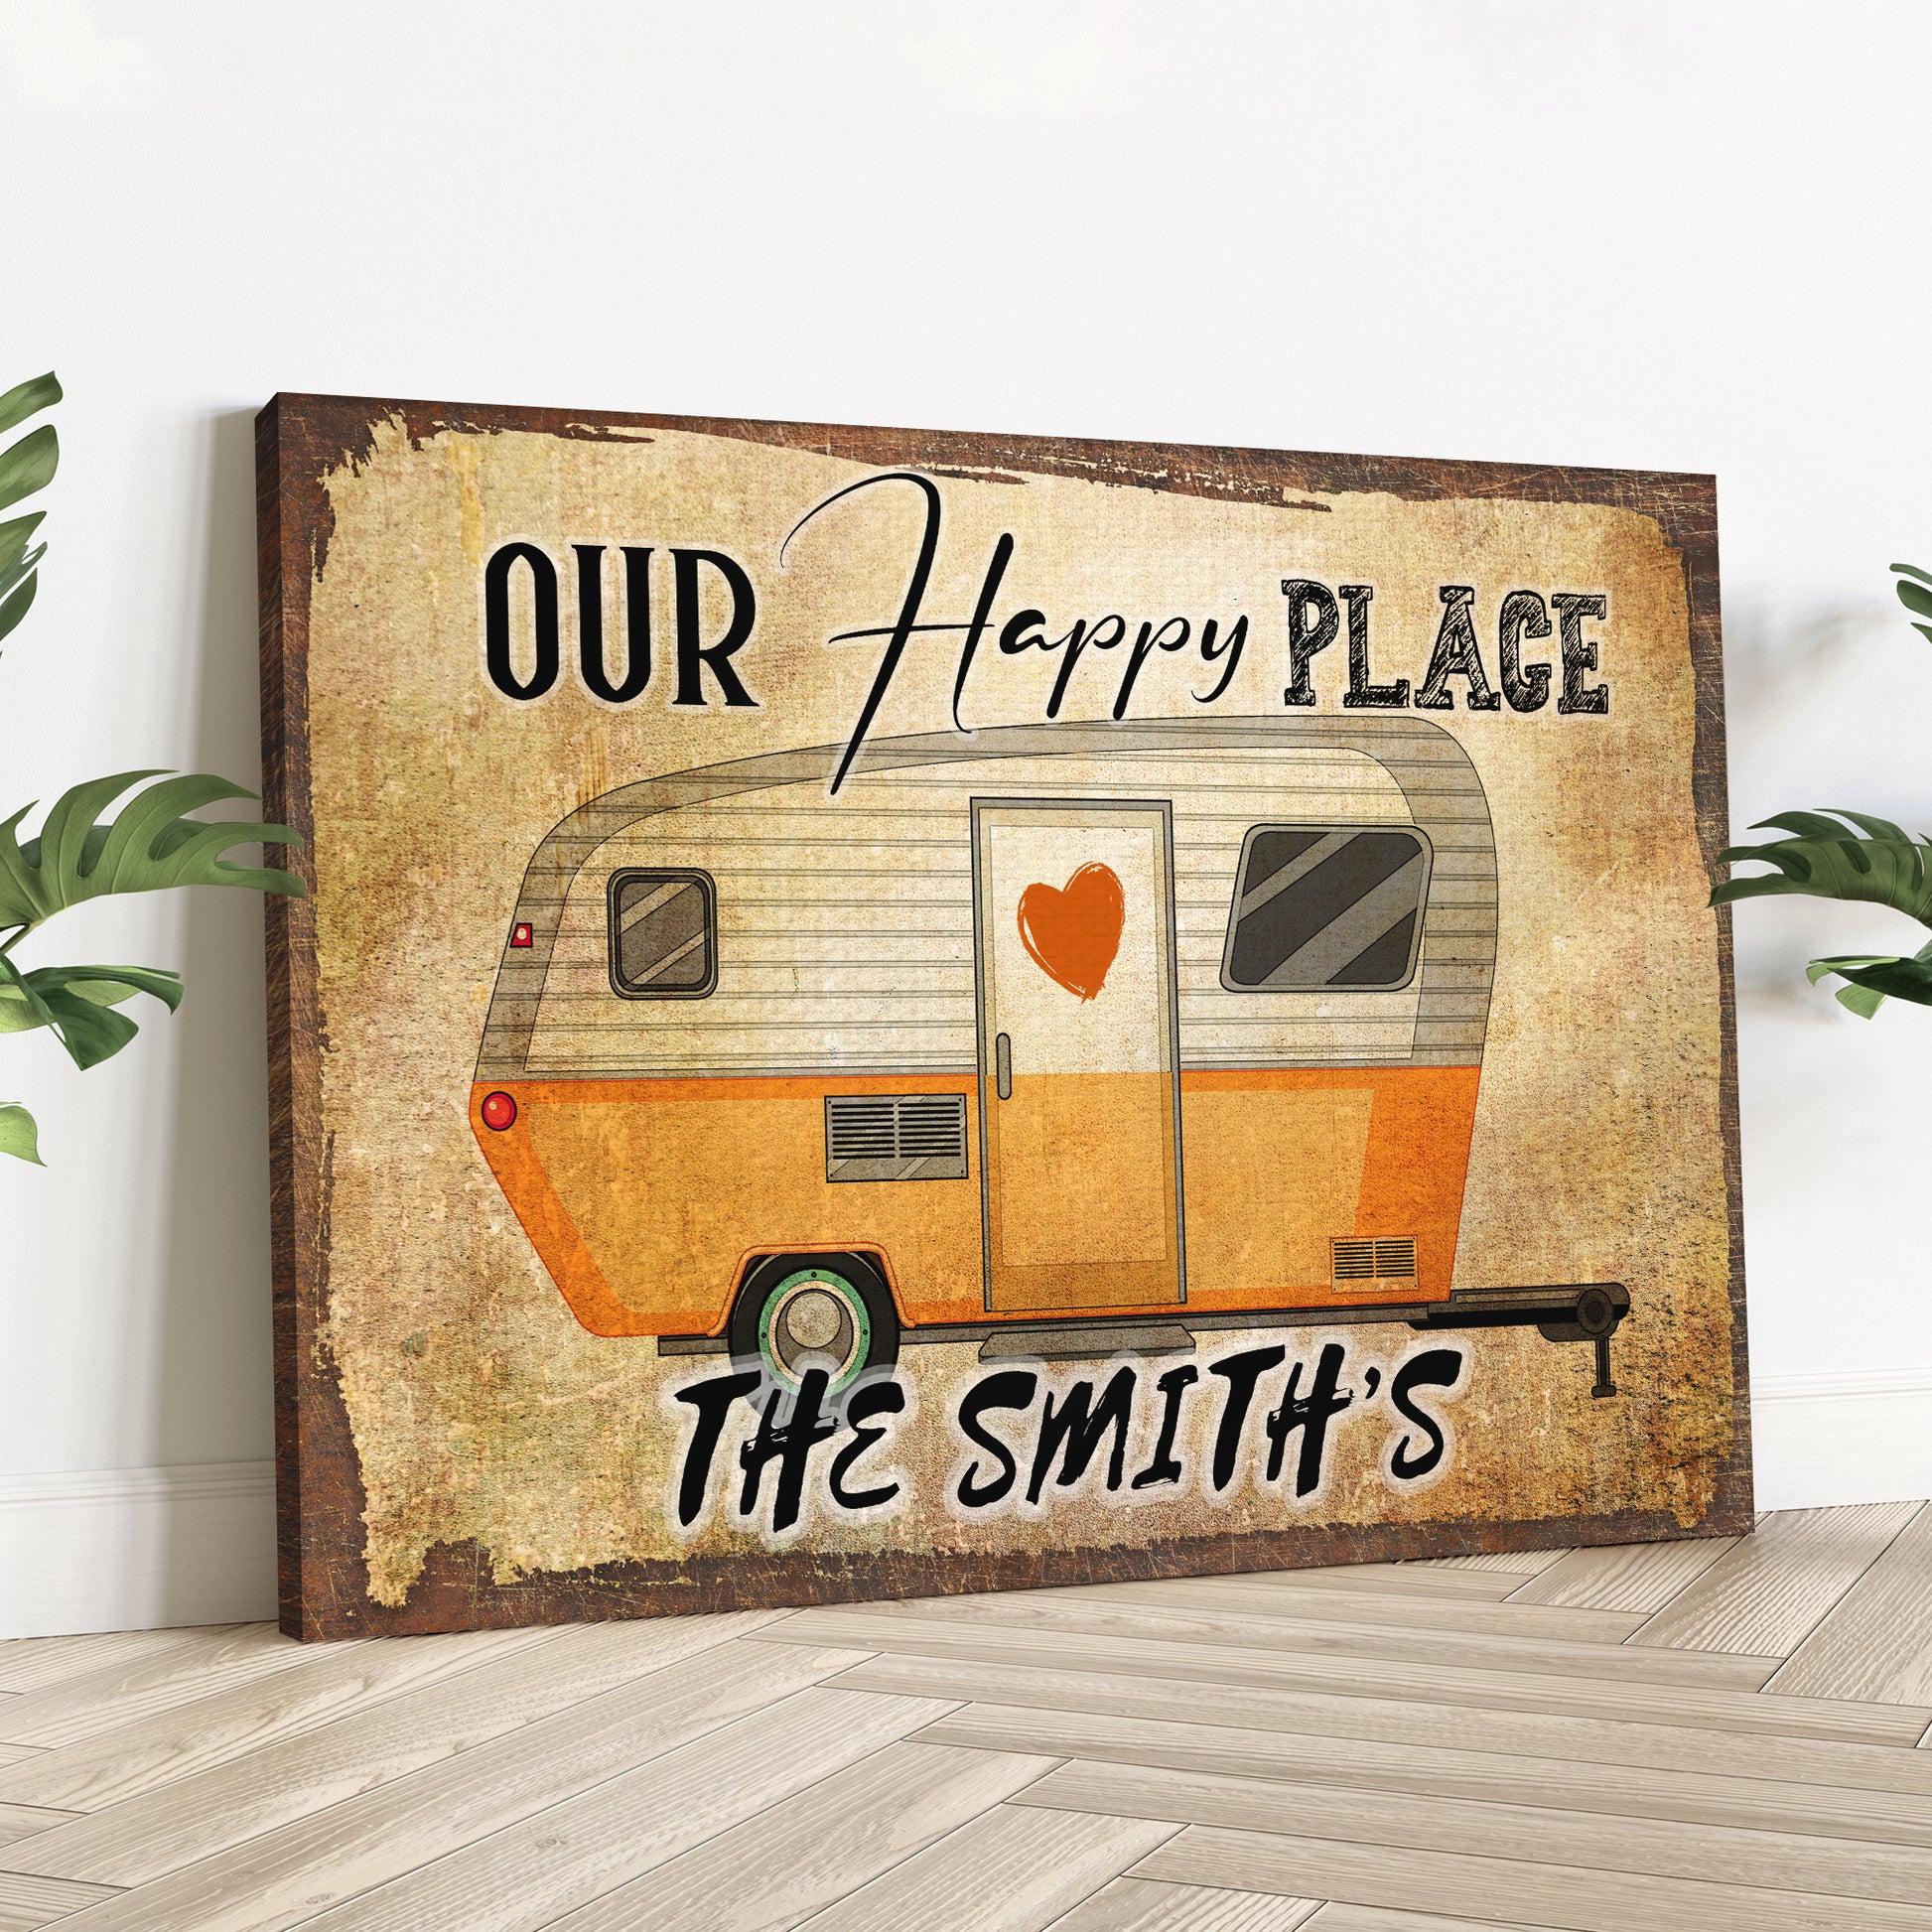 Our Happy Place Trailer Sign II- Image by Tailored Canvases